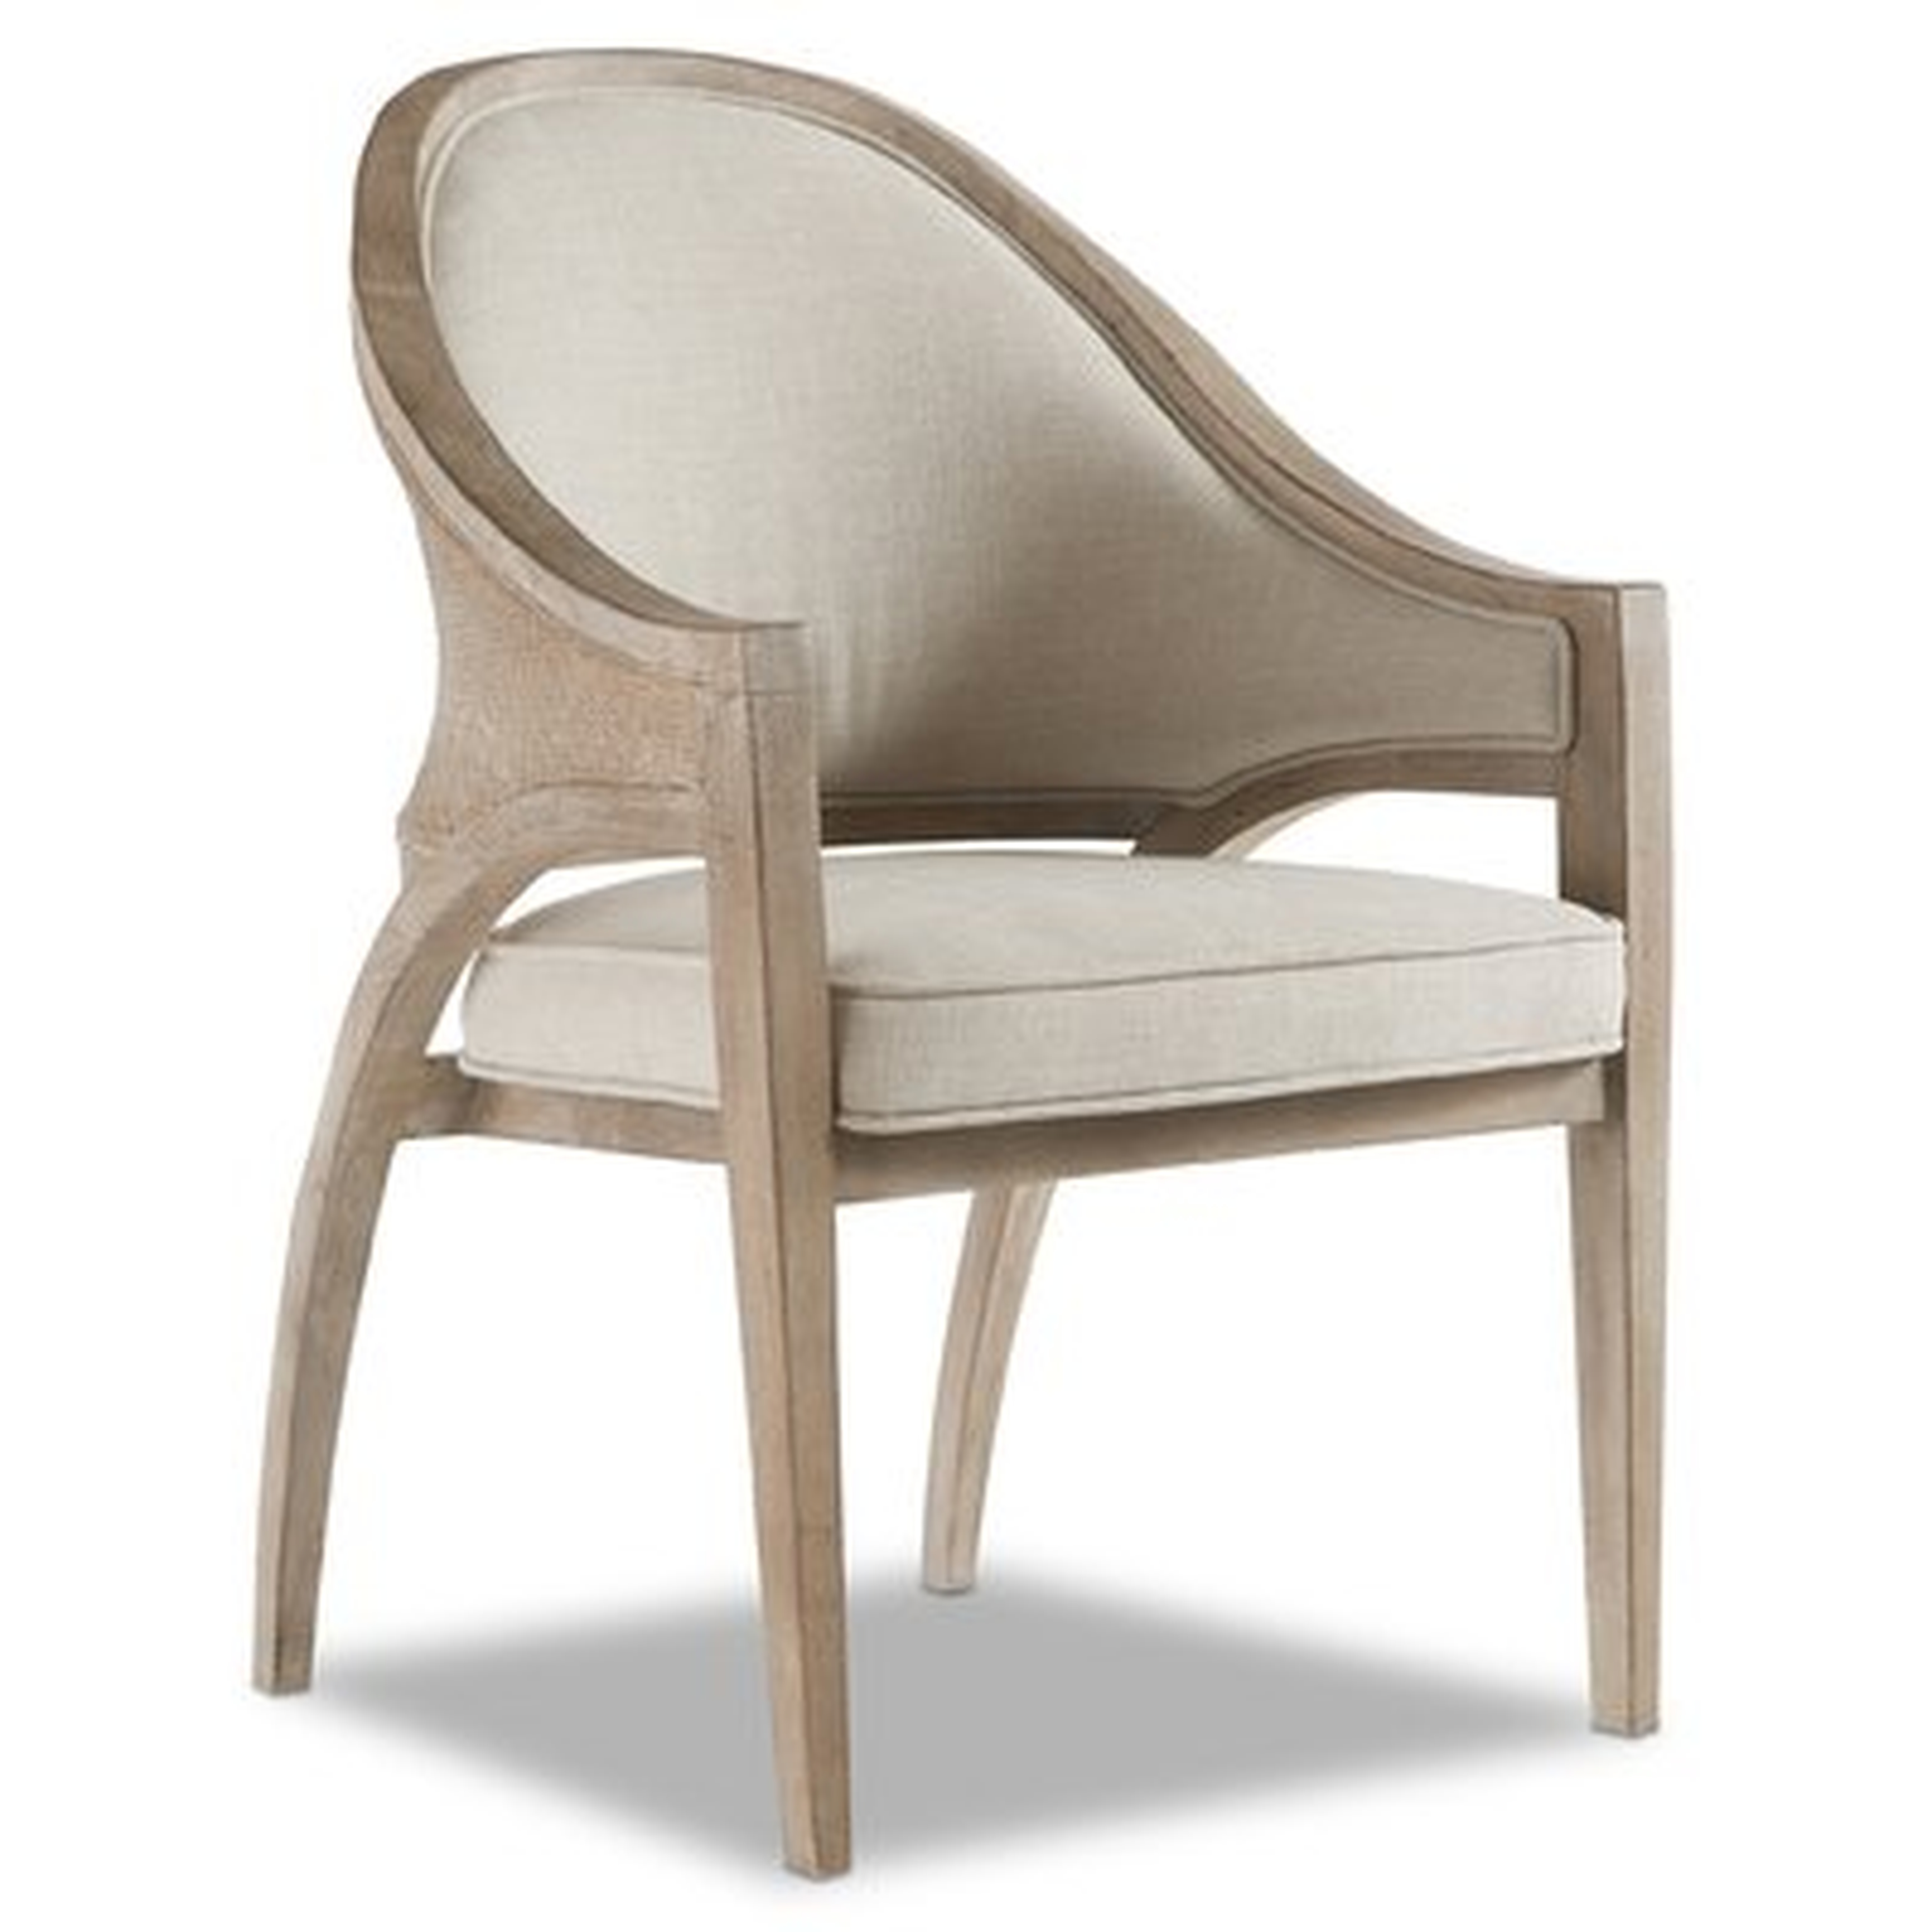 Affinity Upholstered Dining Chair - Wayfair